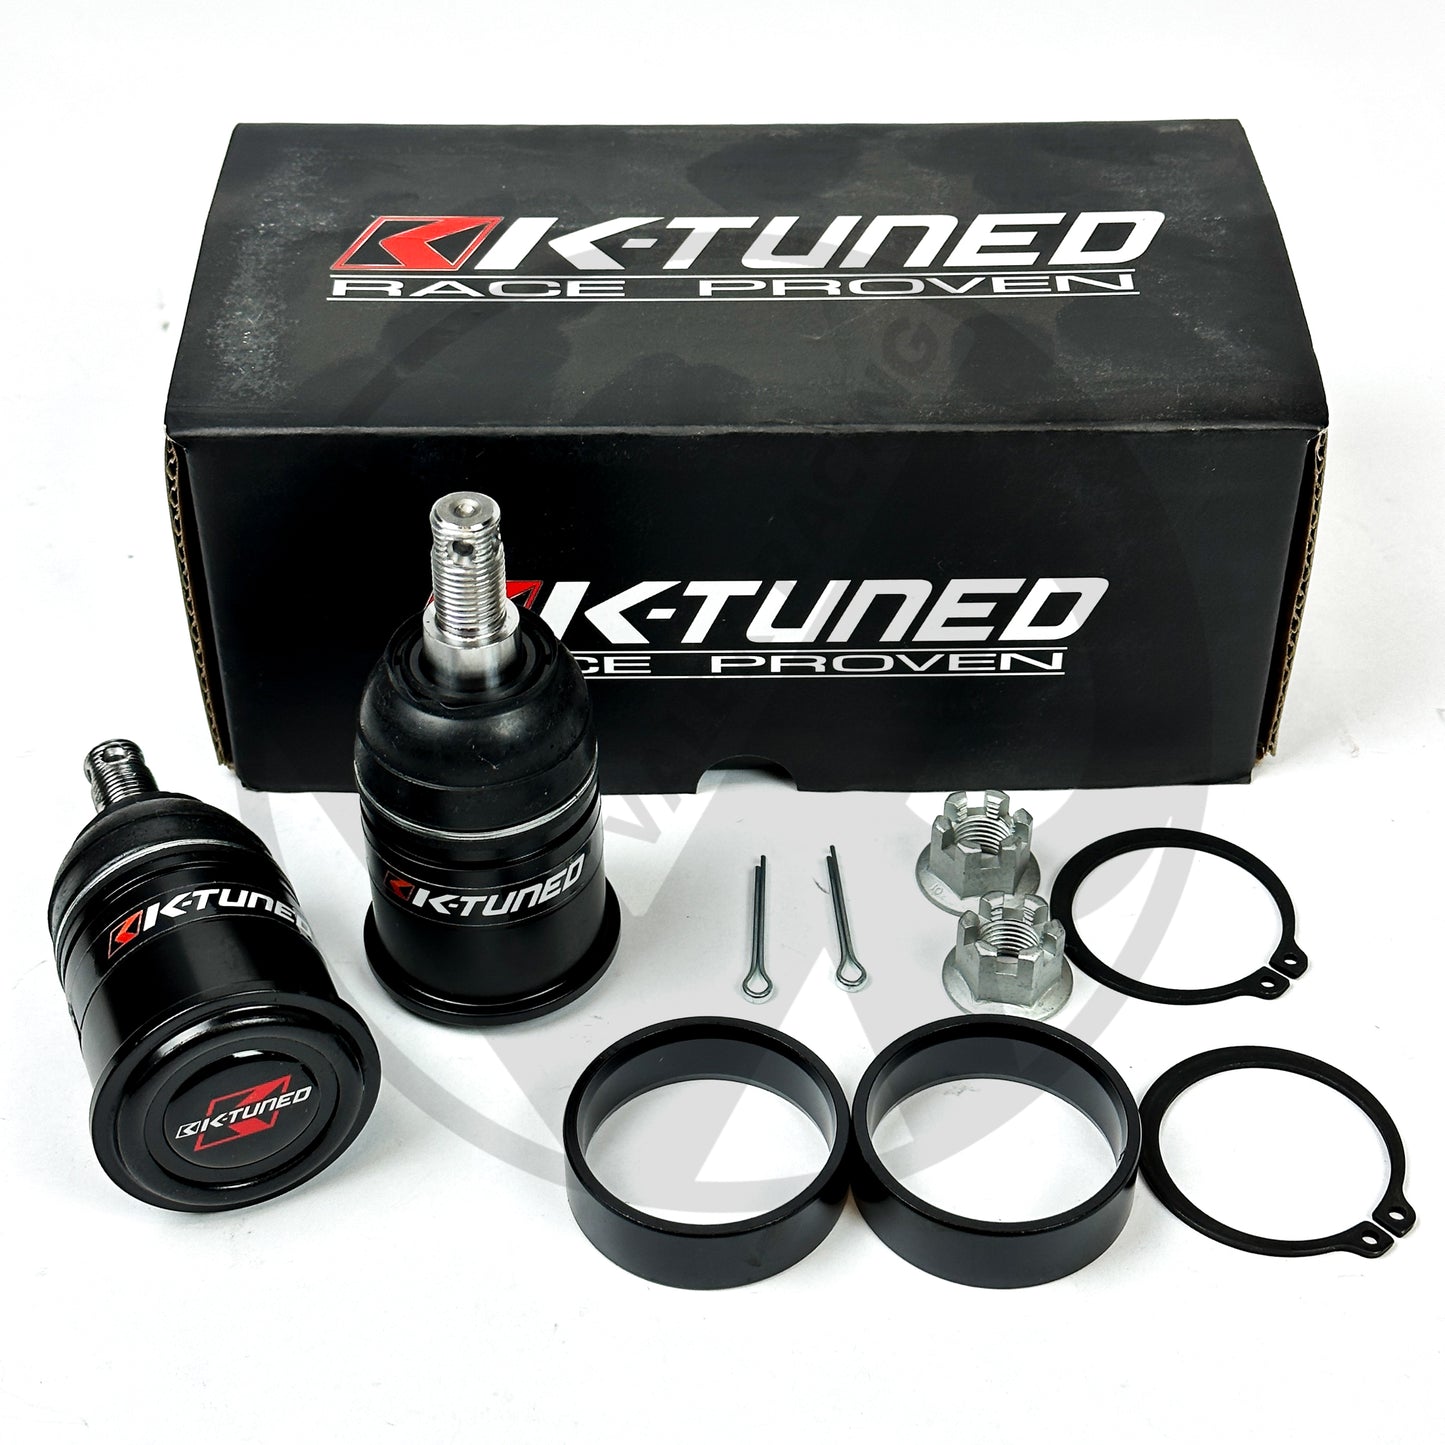 K TUNED ROLL CENTER ADJUSTER BALL JOINTS FOR HONDA ACCORD 03-07